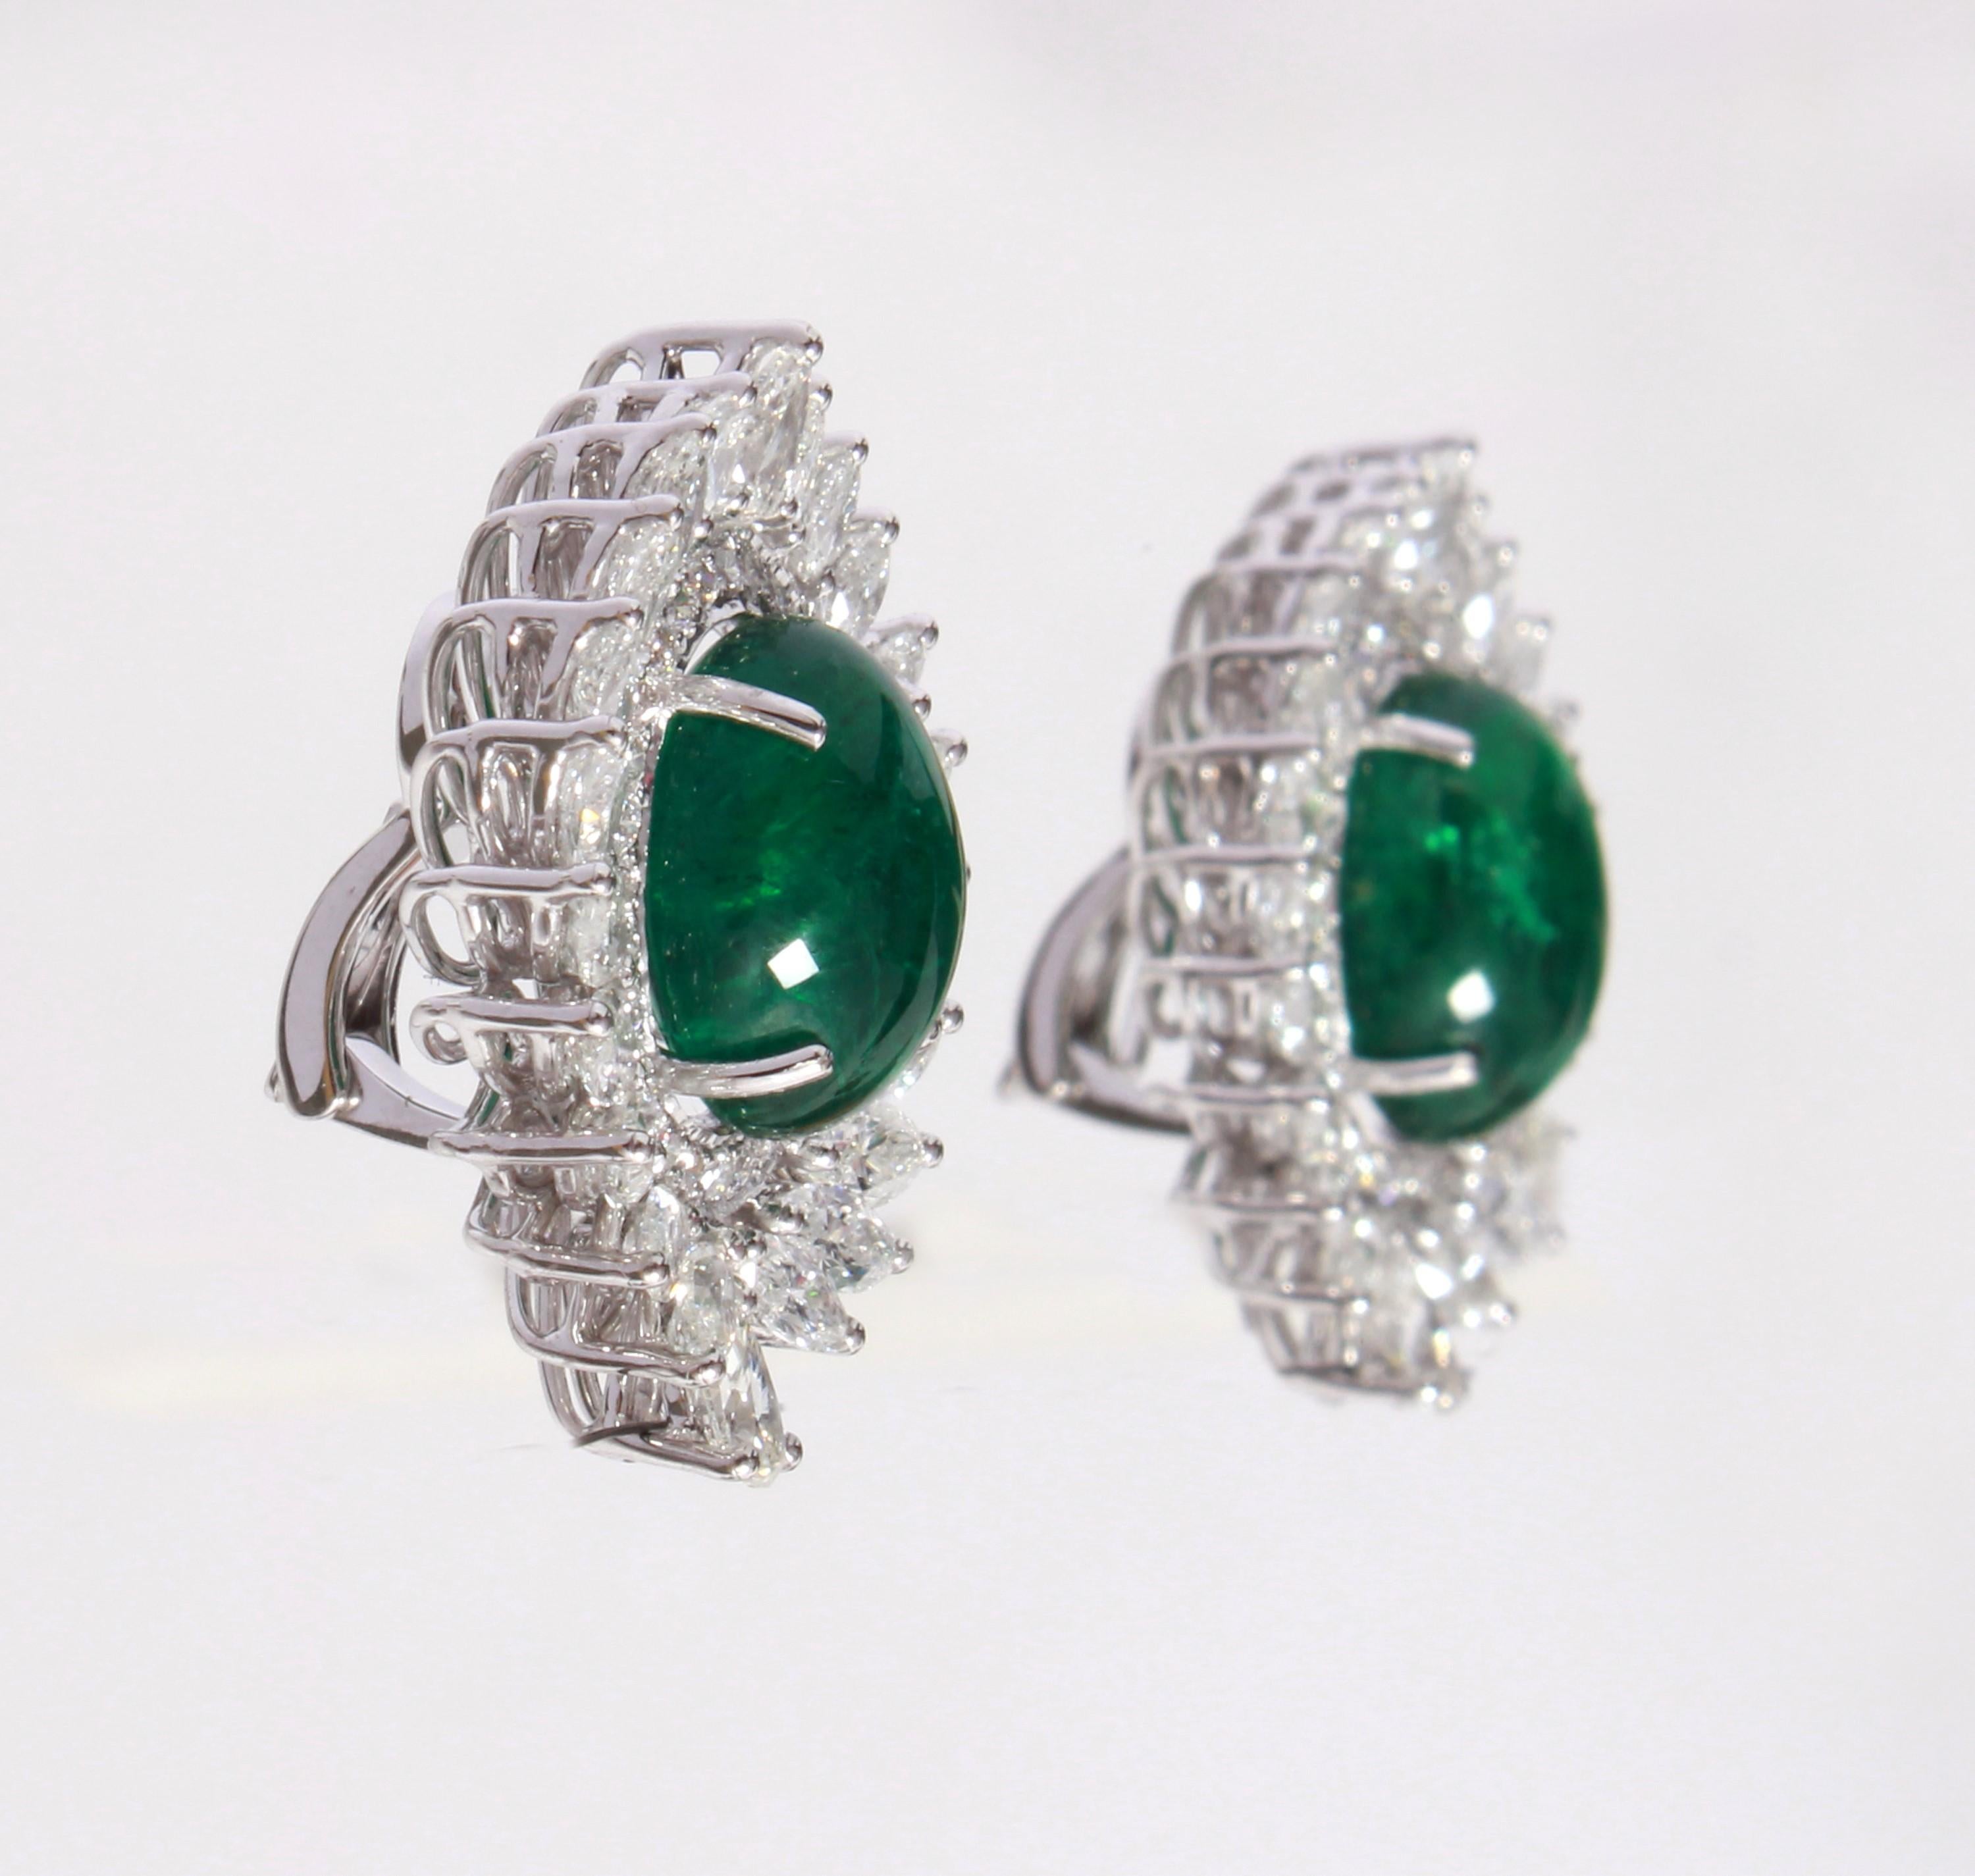 These Earrings have a pair of Zambian emeralds which weigh 15.32 carats and are surrounded by 56 Round Cut White Diamonds that weigh 0.81 carats, 4 Pear Cut White Diamonds that weigh 0.97 carats and 40 Marquise Cut White Diamonds that weigh 5.07